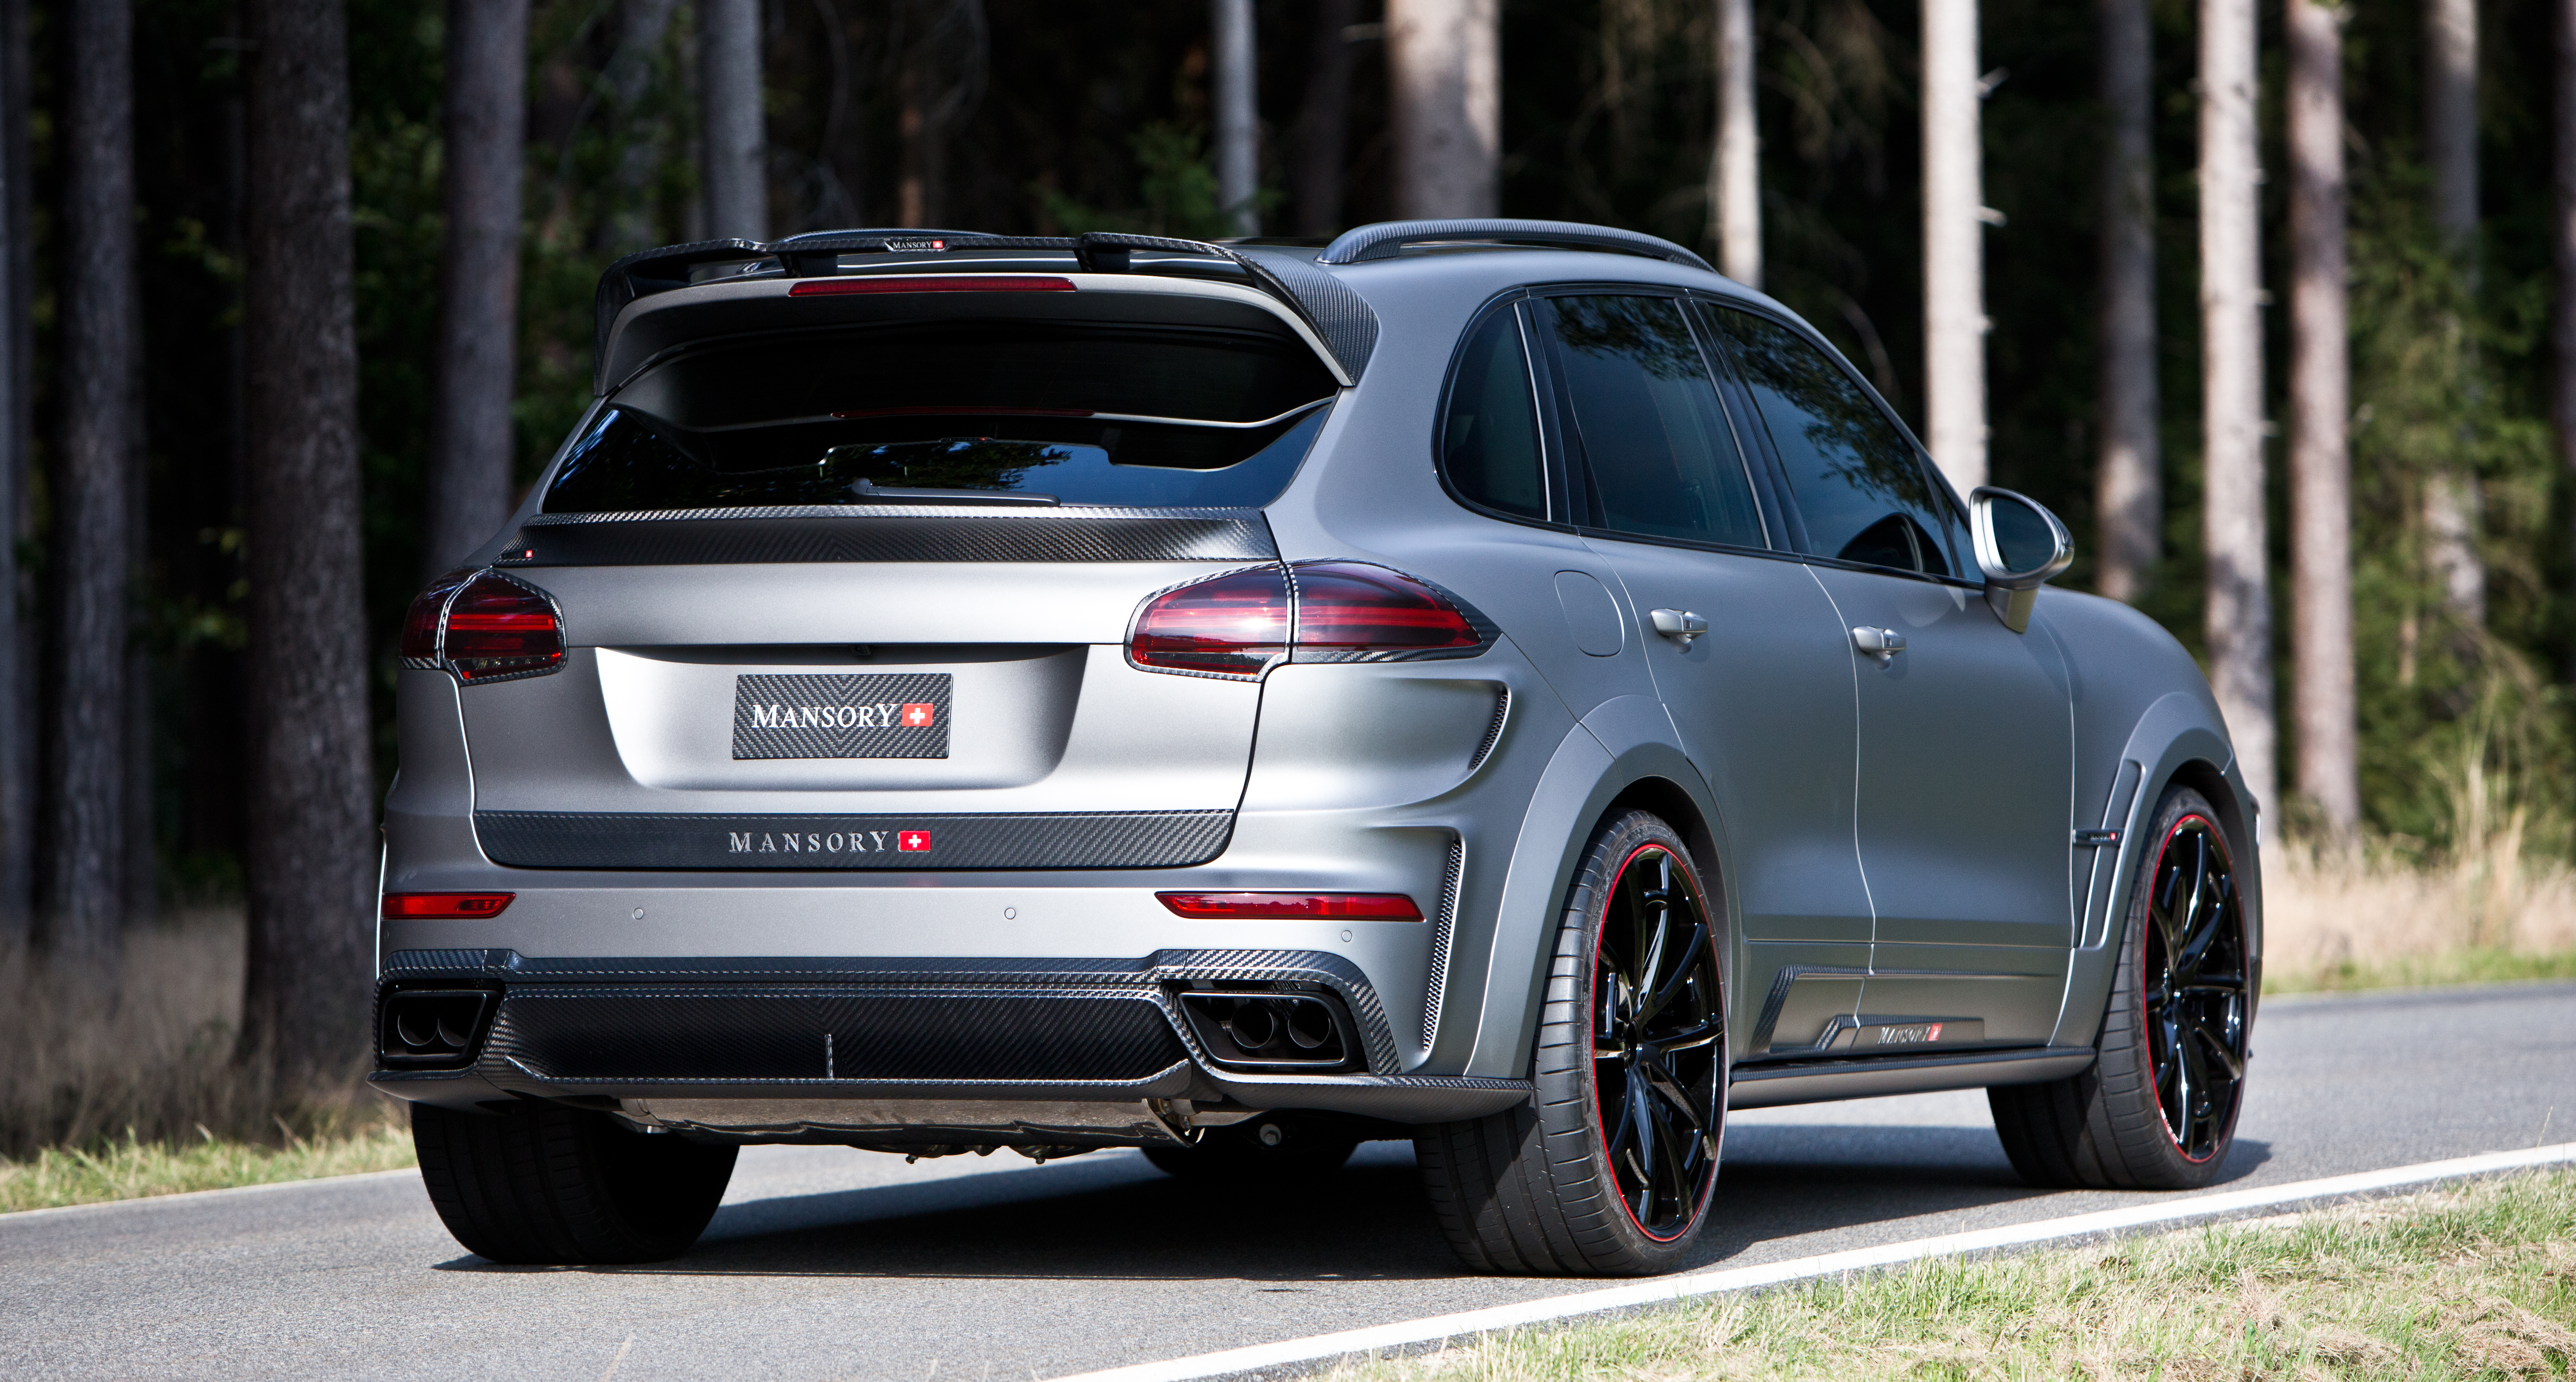 https://www.mansory.com/sites/default/files/styles/fullwidth_image_with_custom_ratio/public/migrated/cars/Cars/porsche/new_cayenne/mansory_porsche_958_new_cayenne_02.jpg?h=69d2f572&itok=alvFdYmf